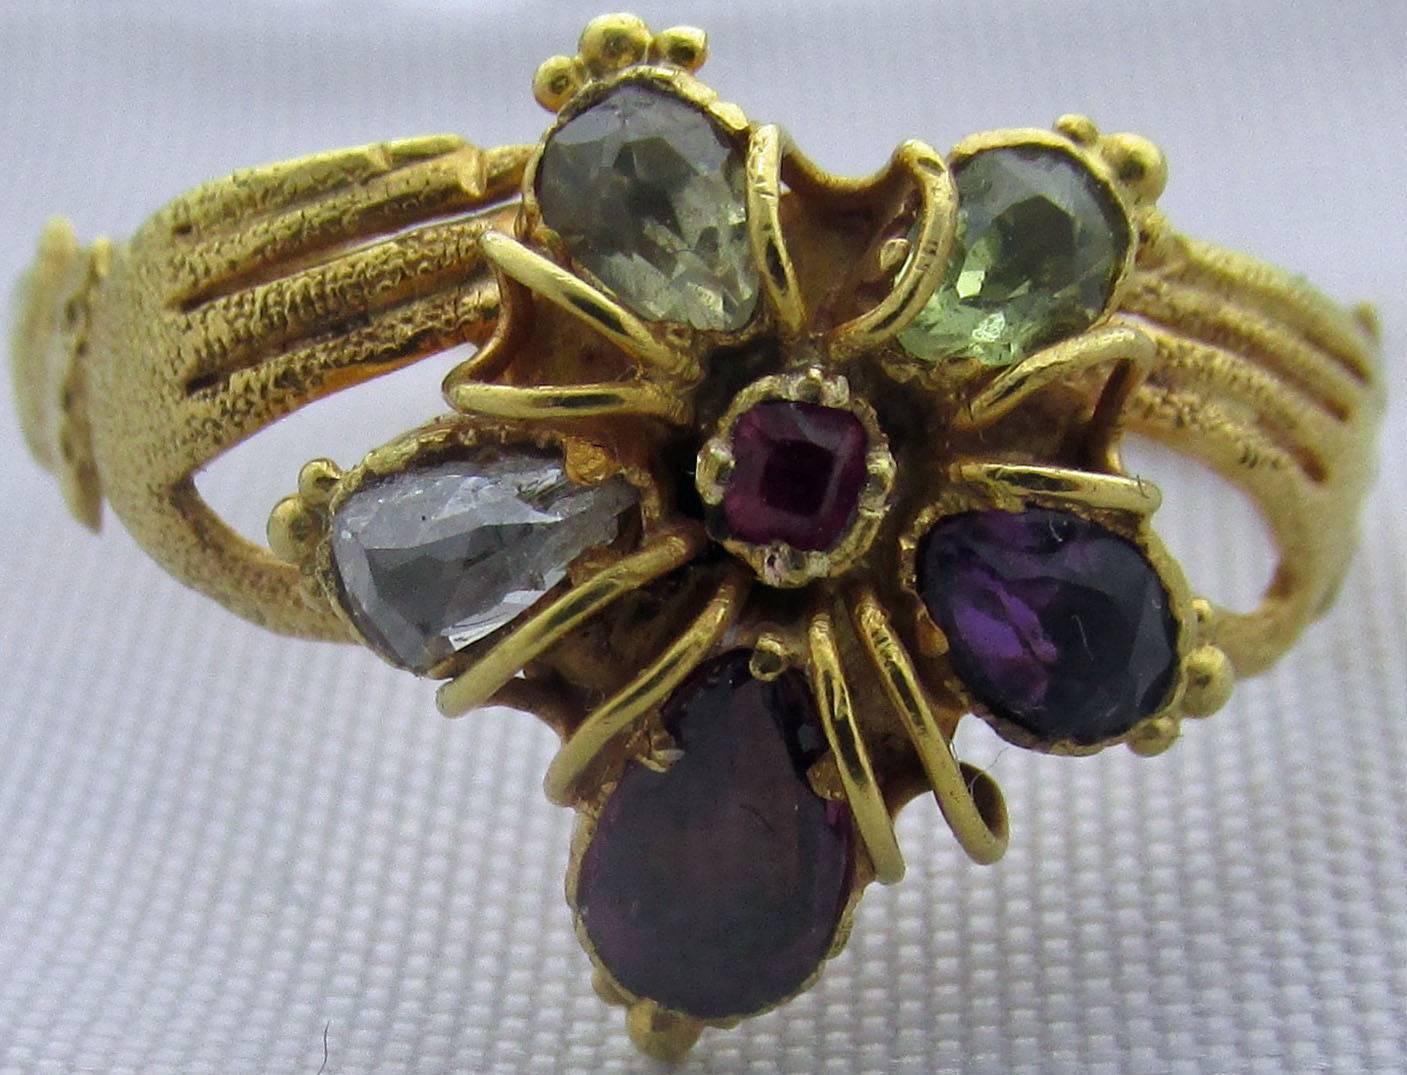 Fabulous Georgian 18K gold and multi-stone pansy ring, the flower supported by a pair of hands, a classic Georgian motif of hands offering a gift. The pansy is a symbol for 